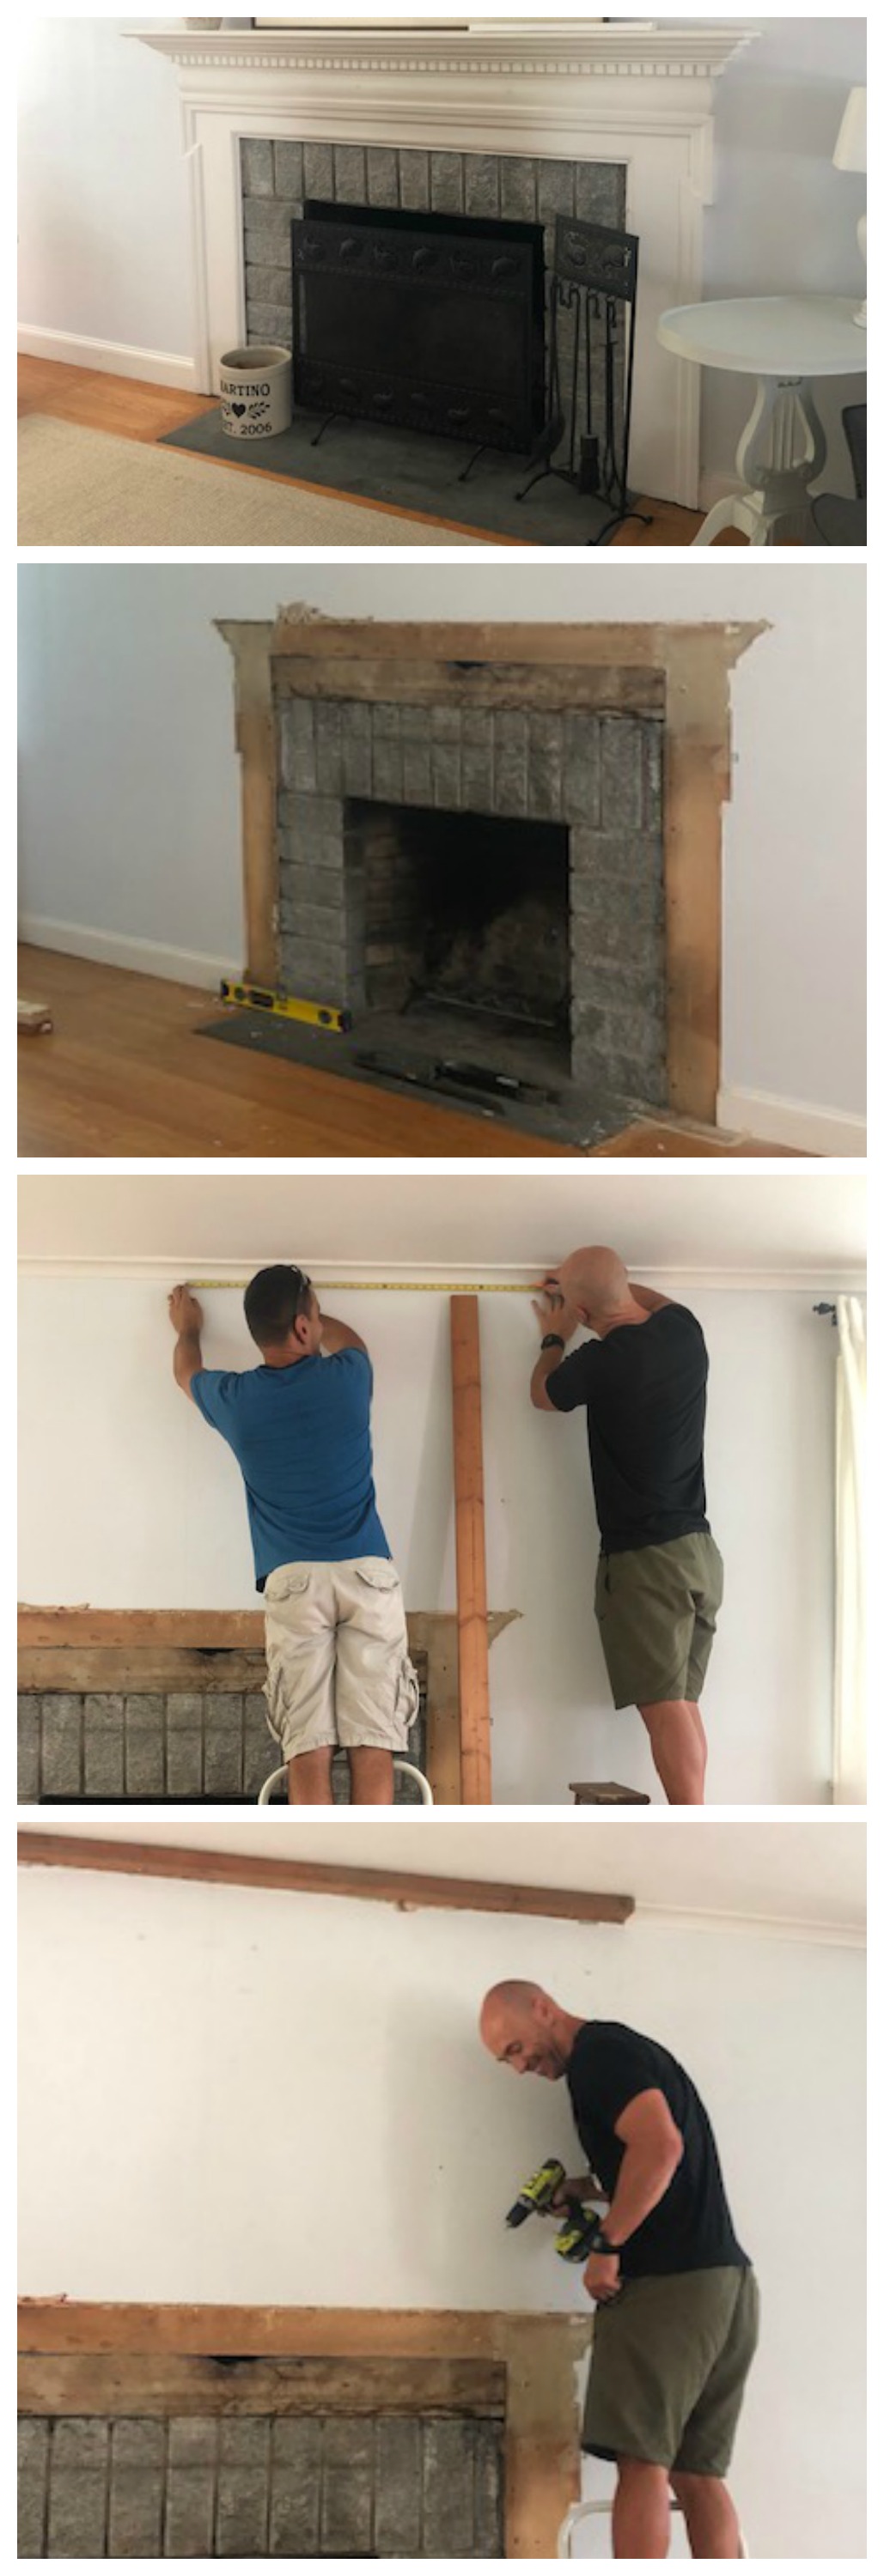 What Sheen to Paint Brick Fireplace Luxury Shiplap Fireplace and Diy Mantle Ditched the Old